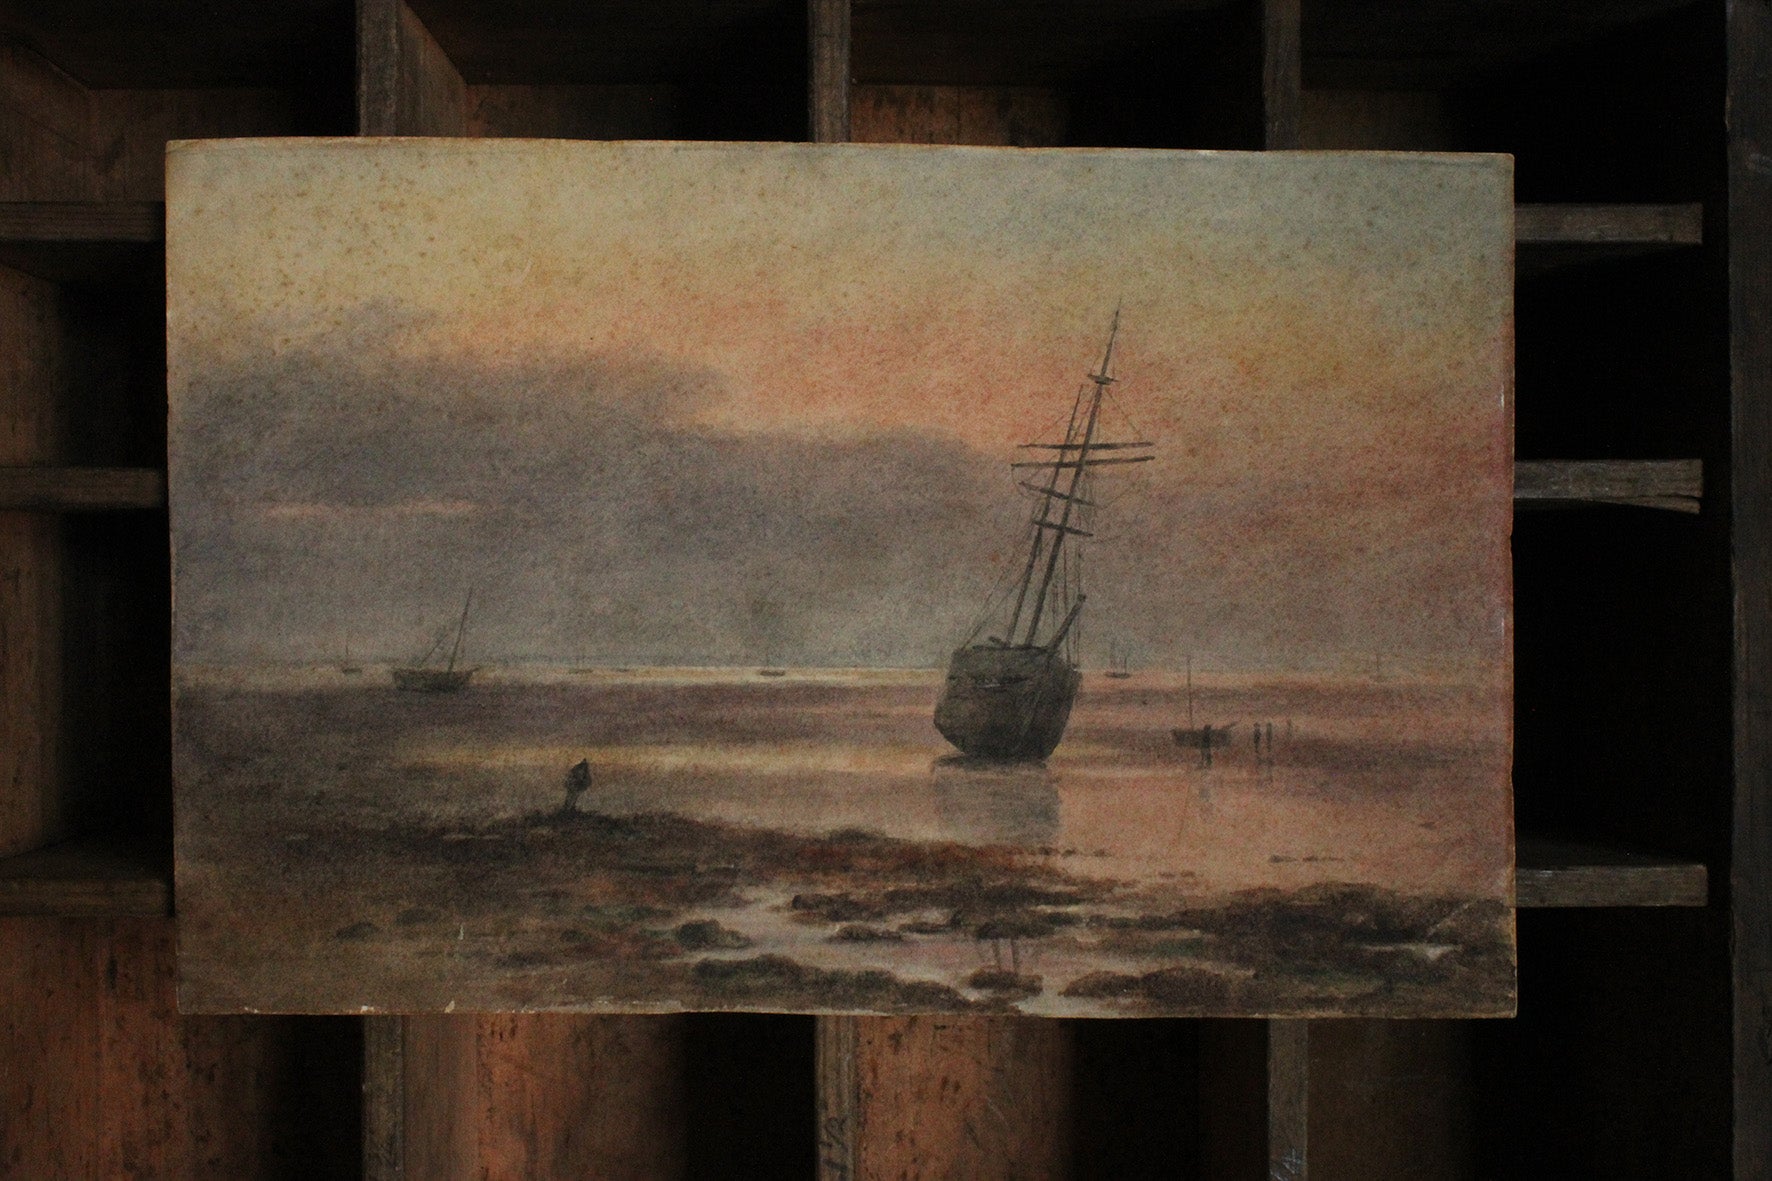 Beautiful Old Watercolour - The Resting Boats